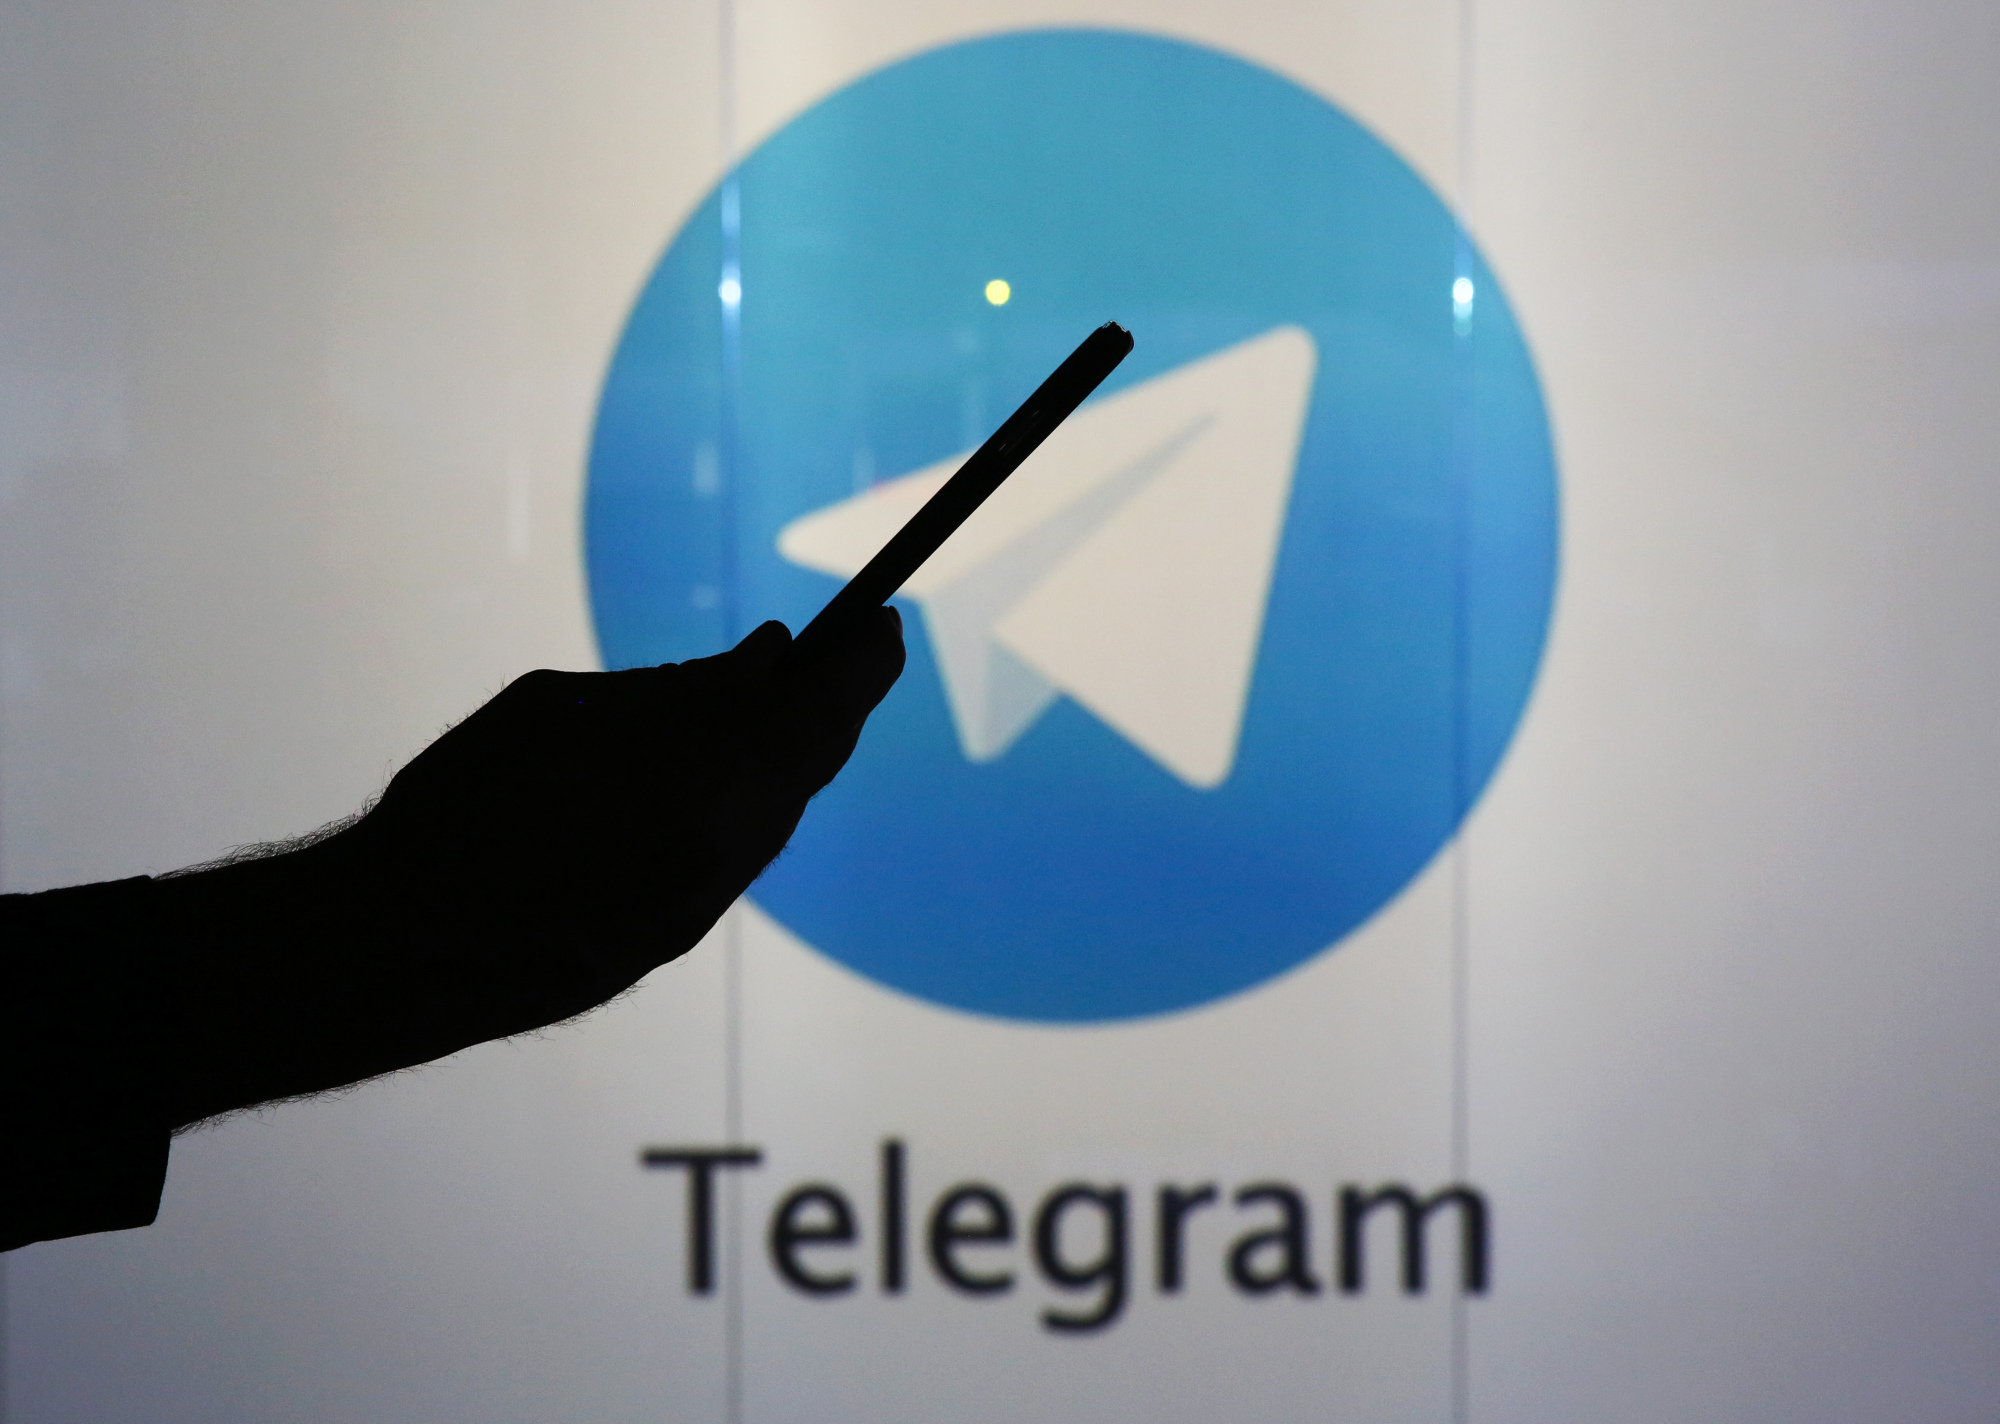 How to Follow Bloomberg on Telegram